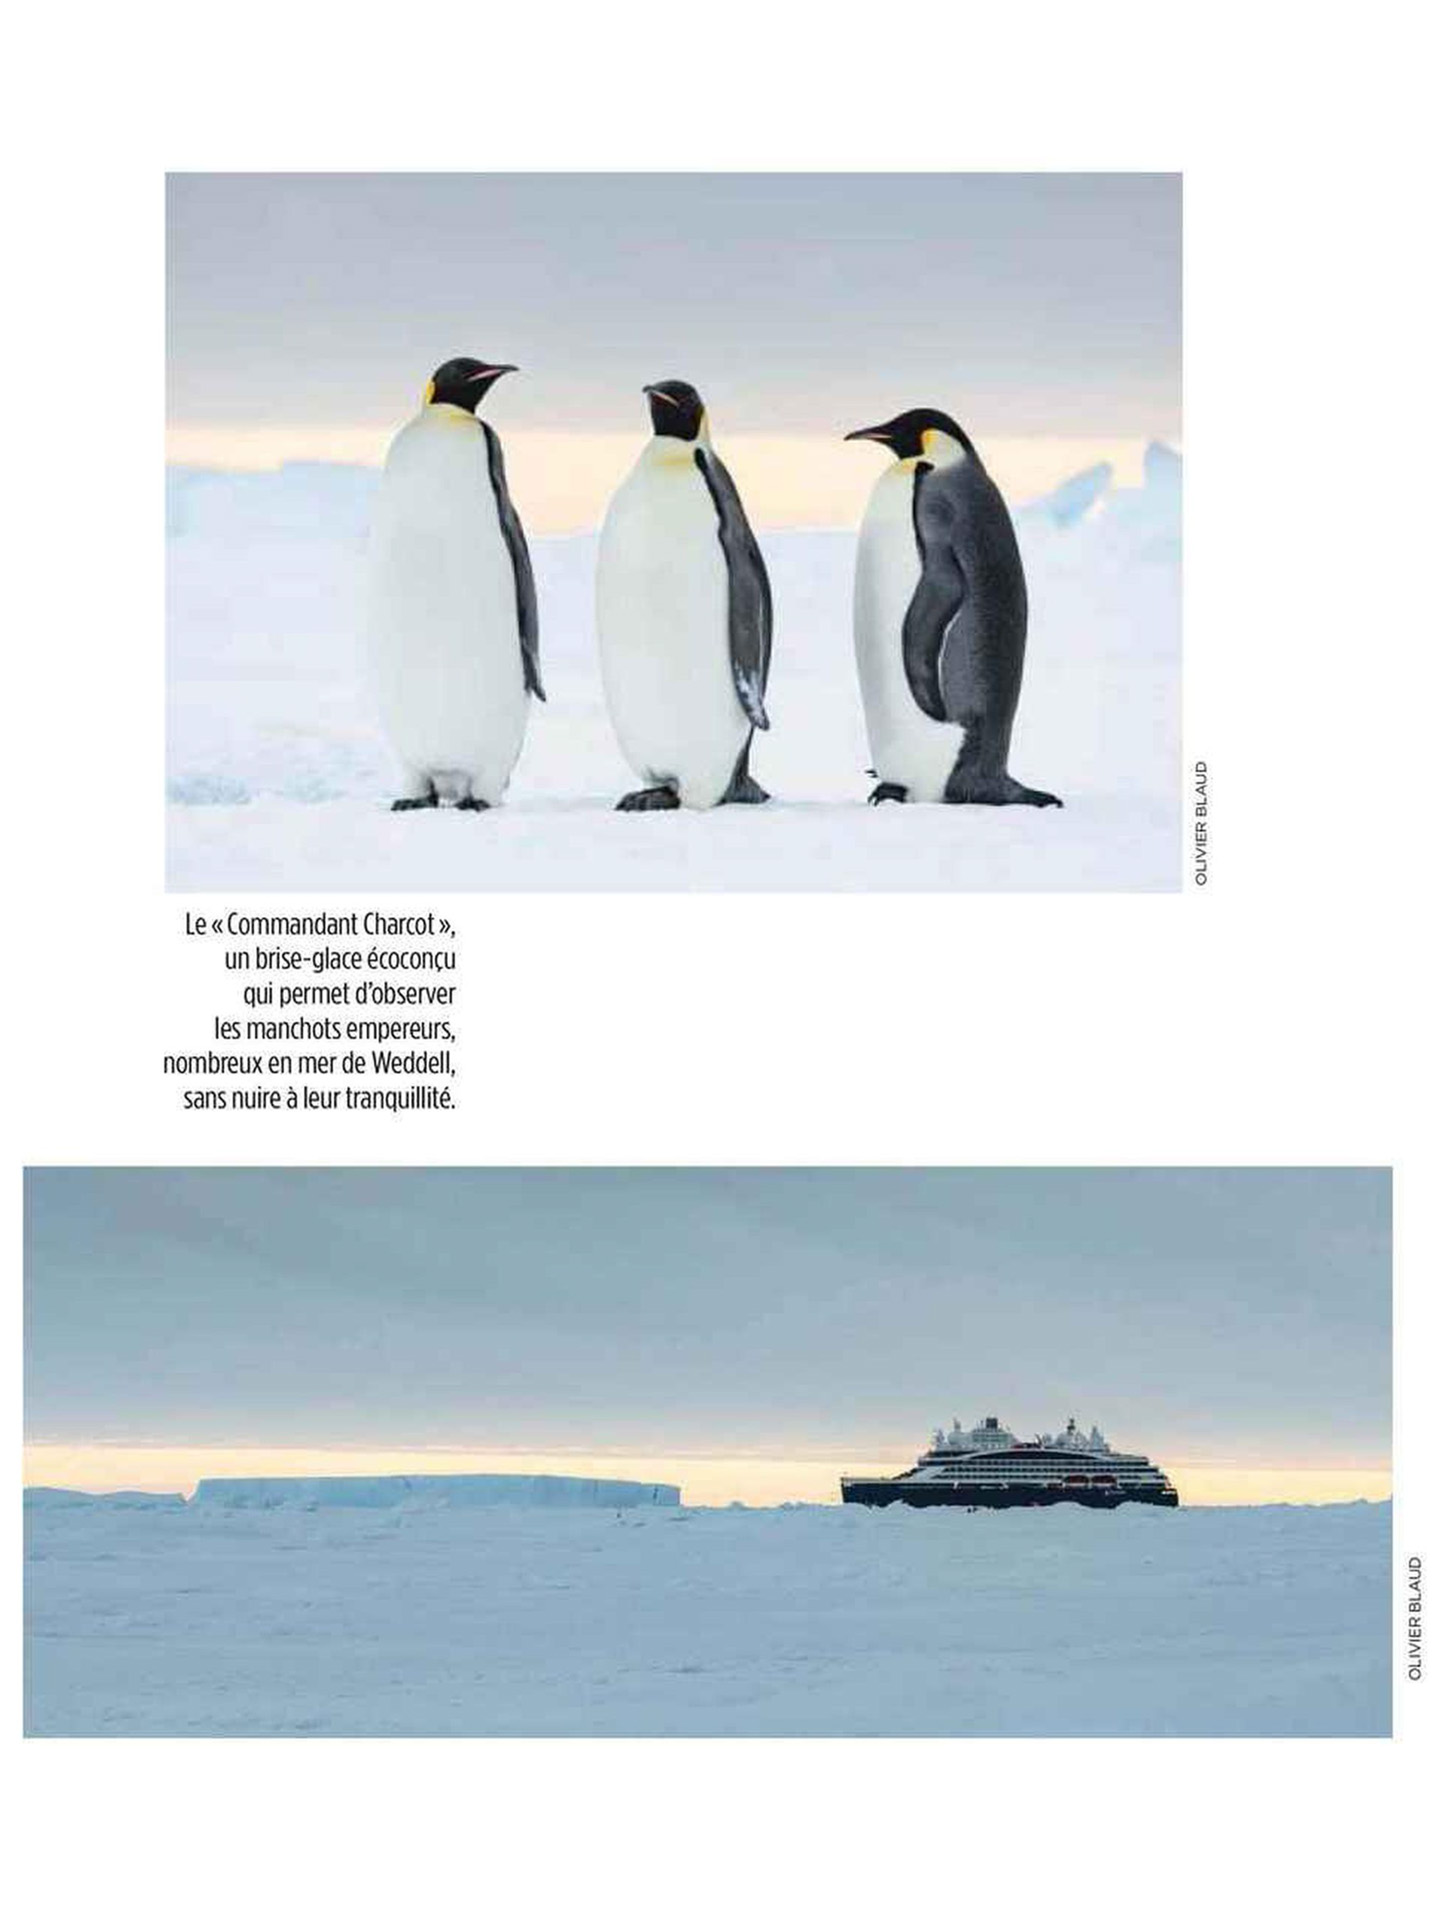 article on commander charcot of ponant in le Point, interior design by jean-philippe nuel, luxury polar expedition ship, cruise, luxury ship, interior design